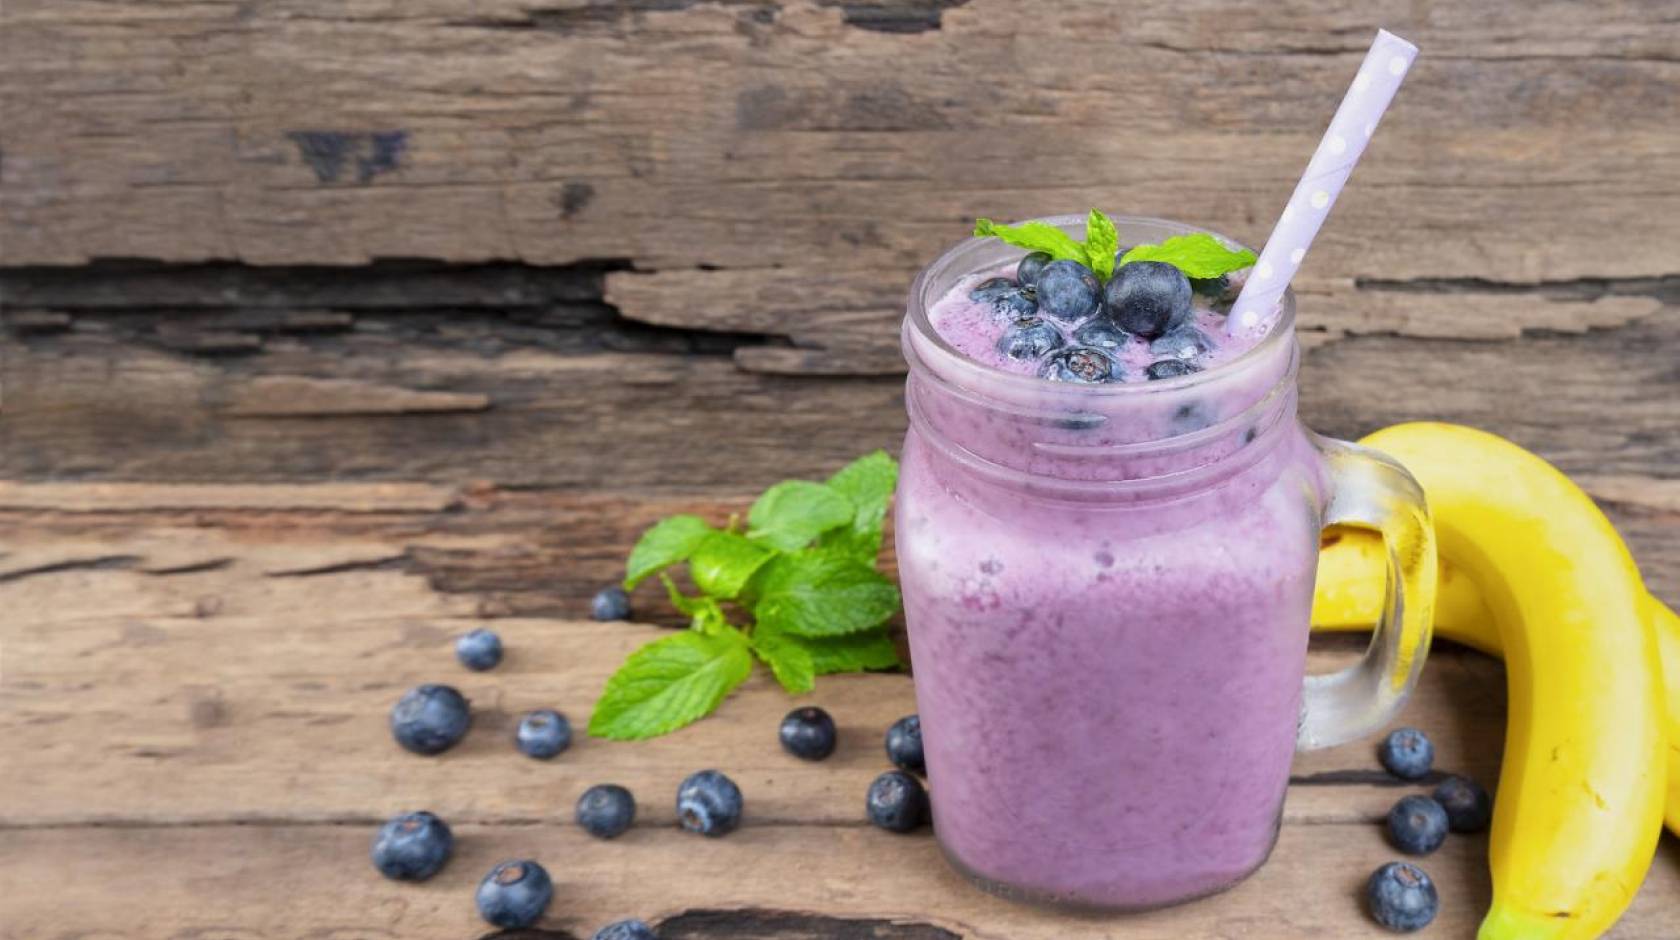 A purple smoothie with blueberries and a banana next to it on a table